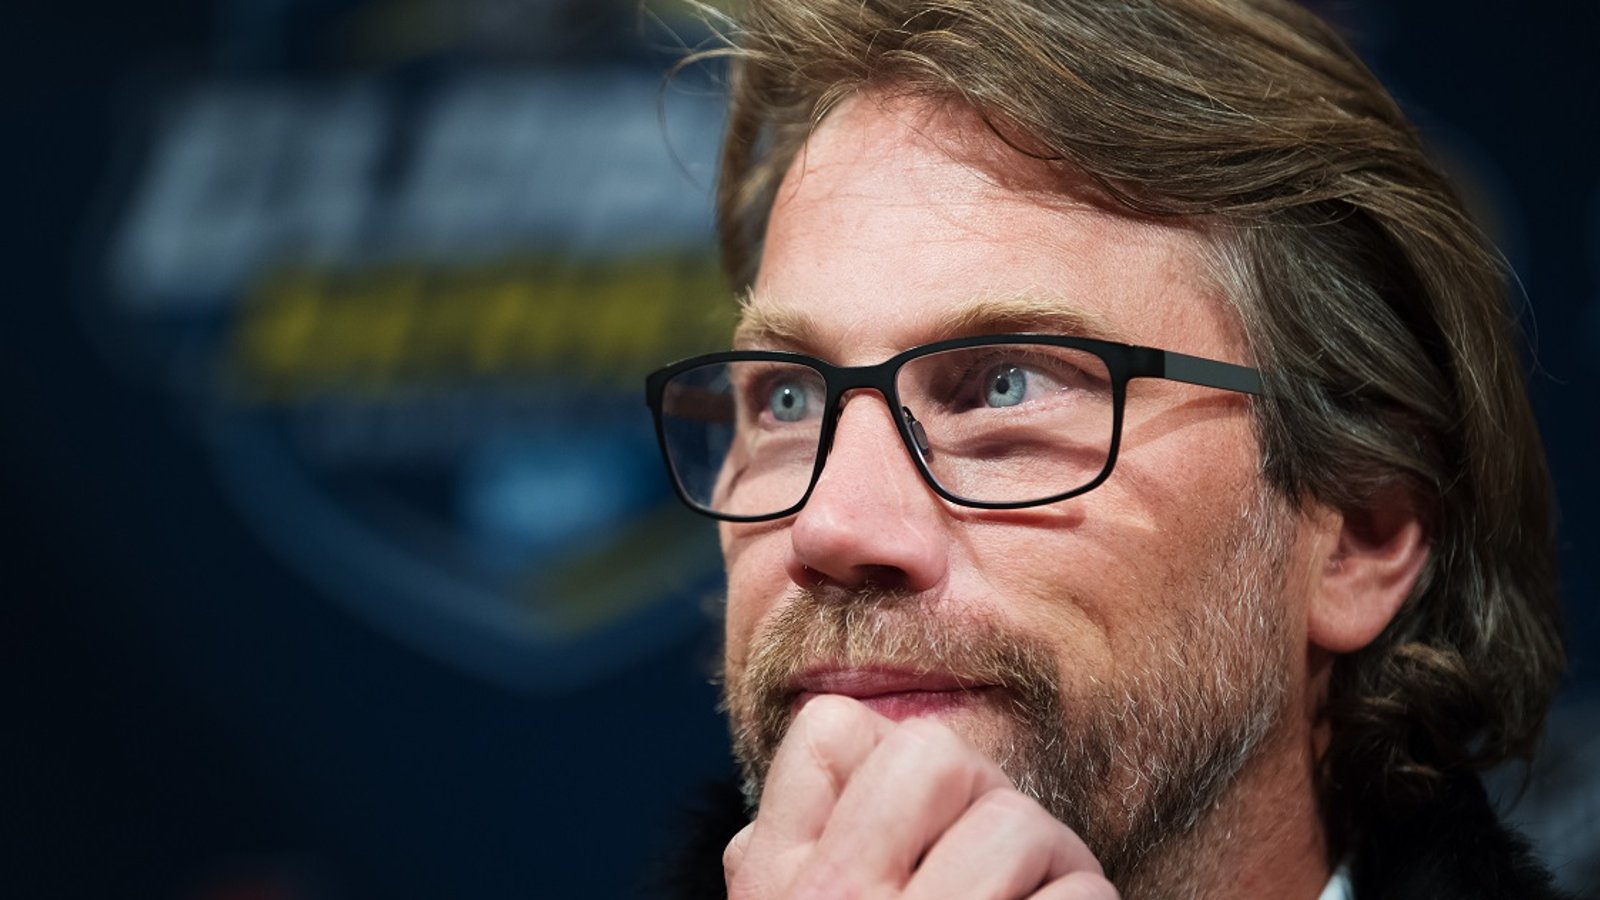 Peter Forsberg reveals he played his entire career with a debilitating condition.